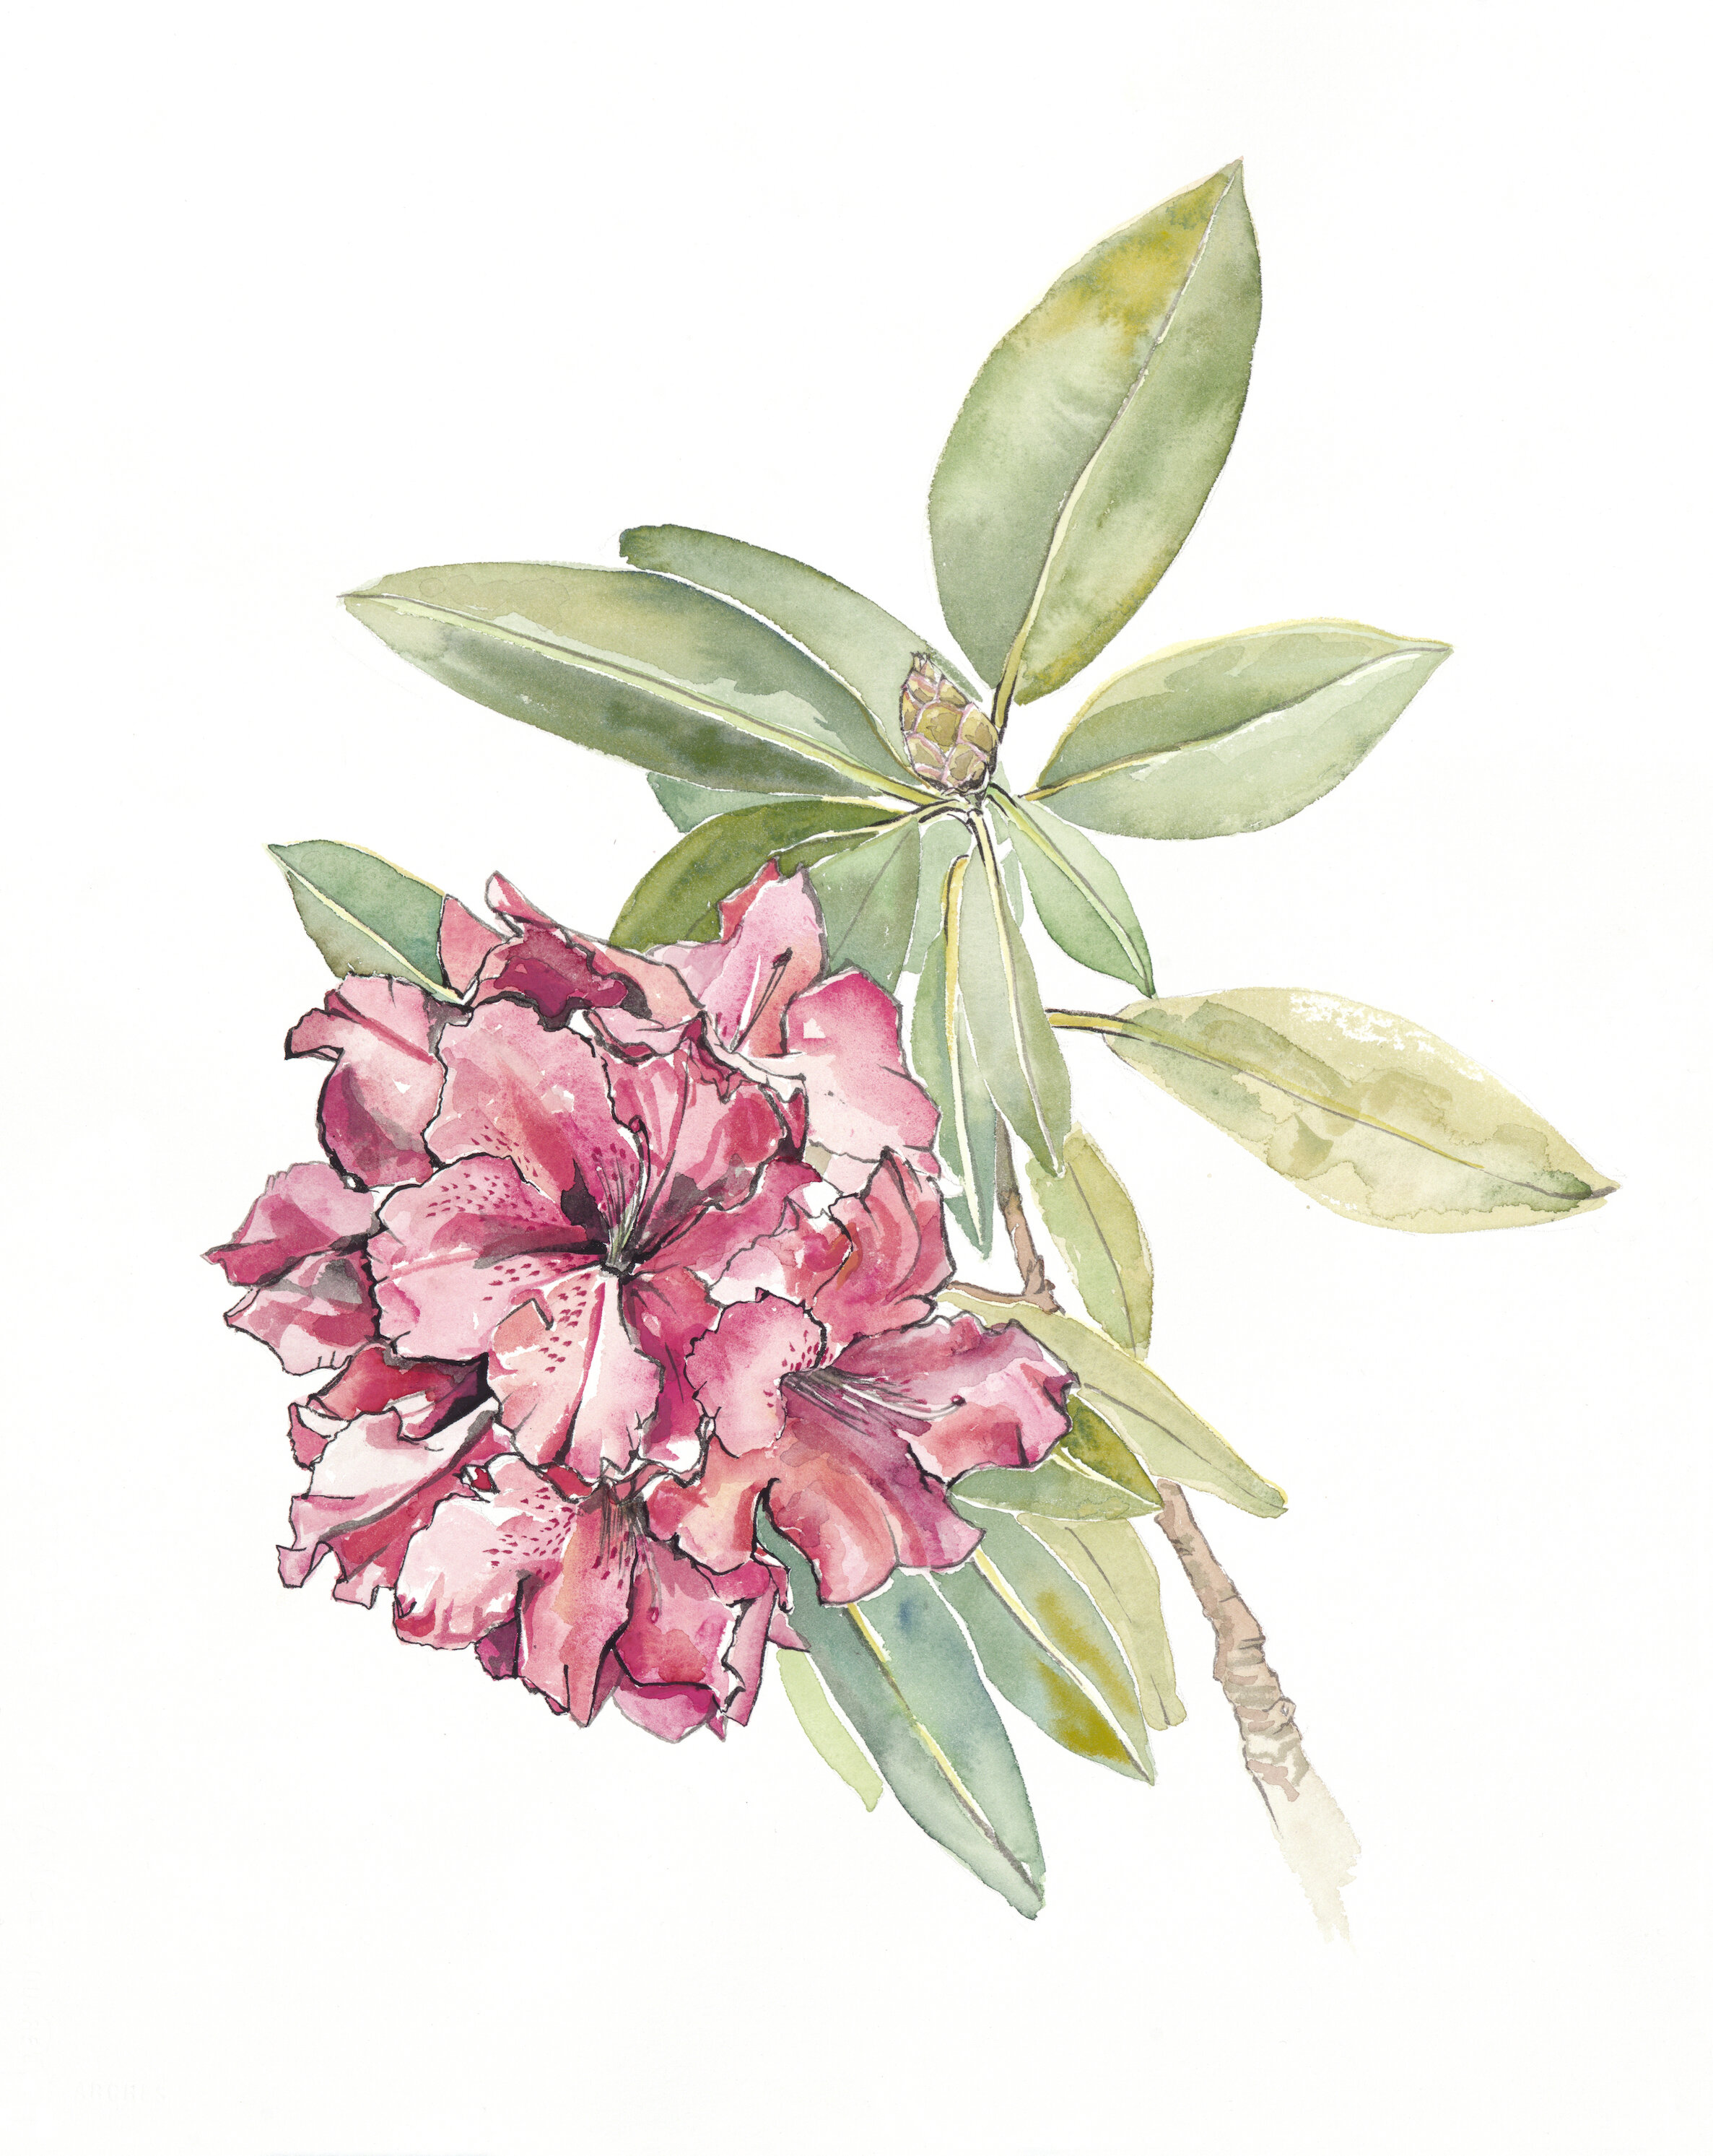 Rhododendron_s.jpg